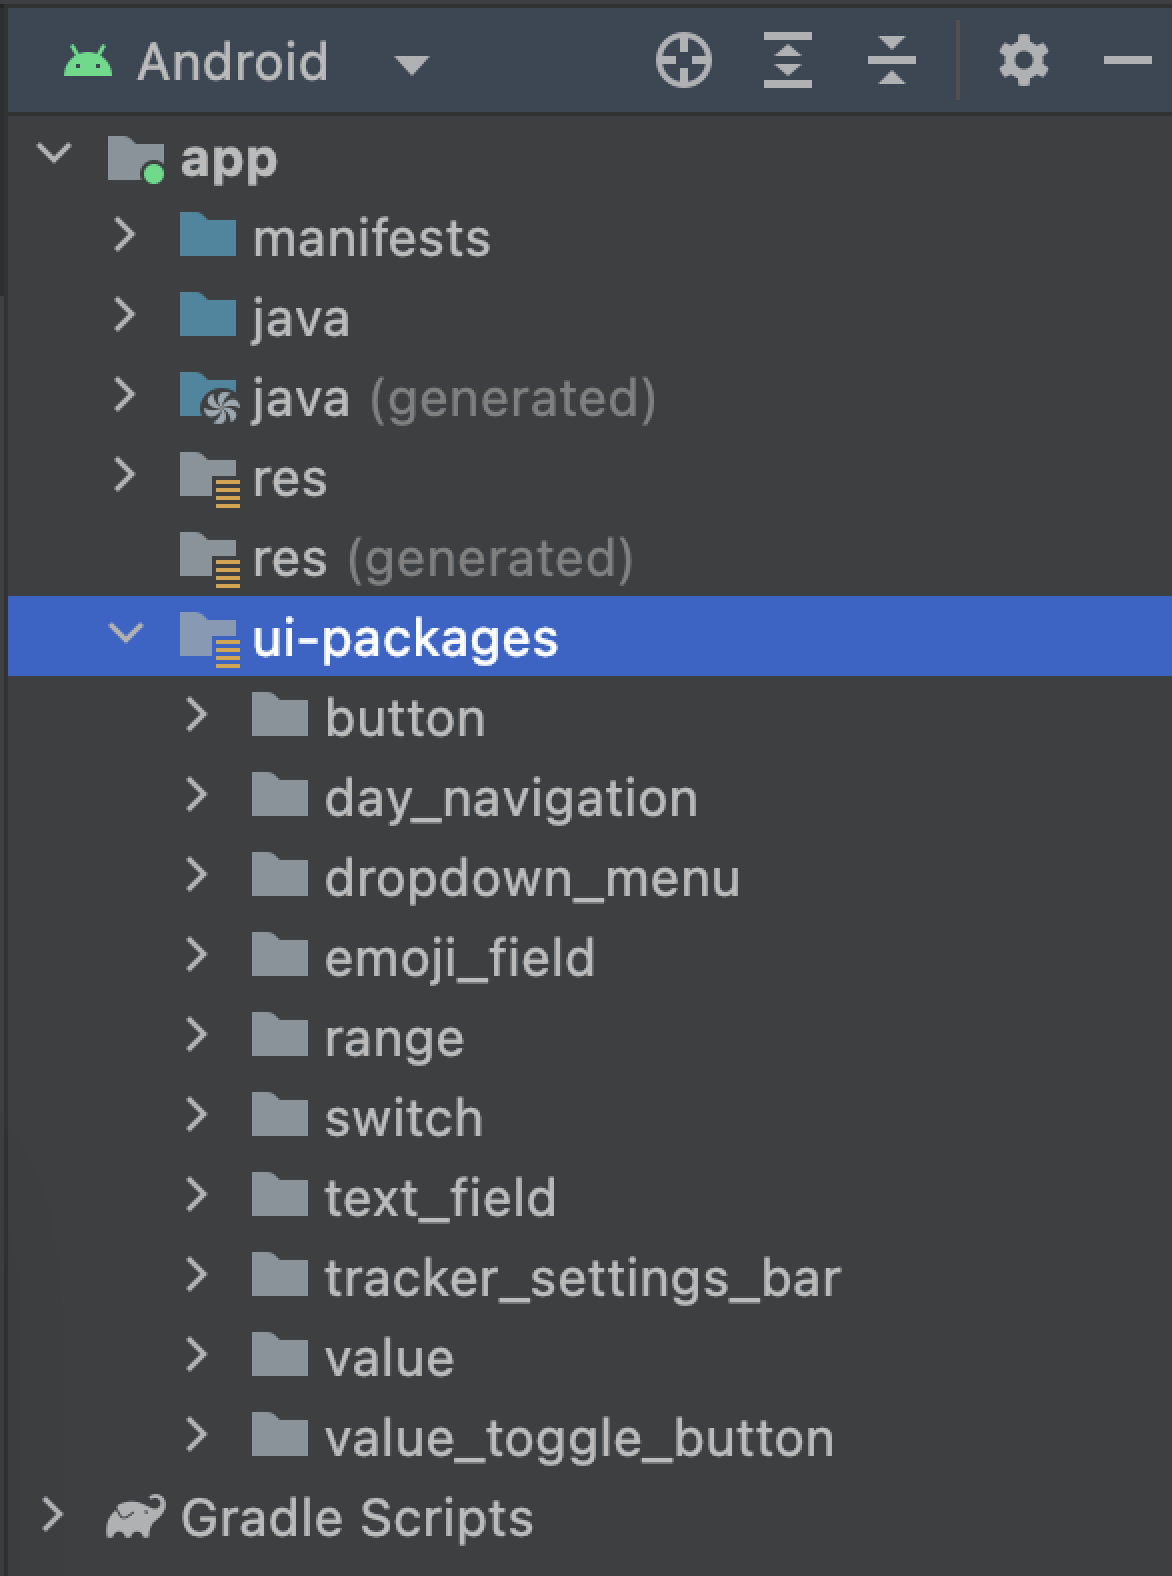 The ui-packages folder